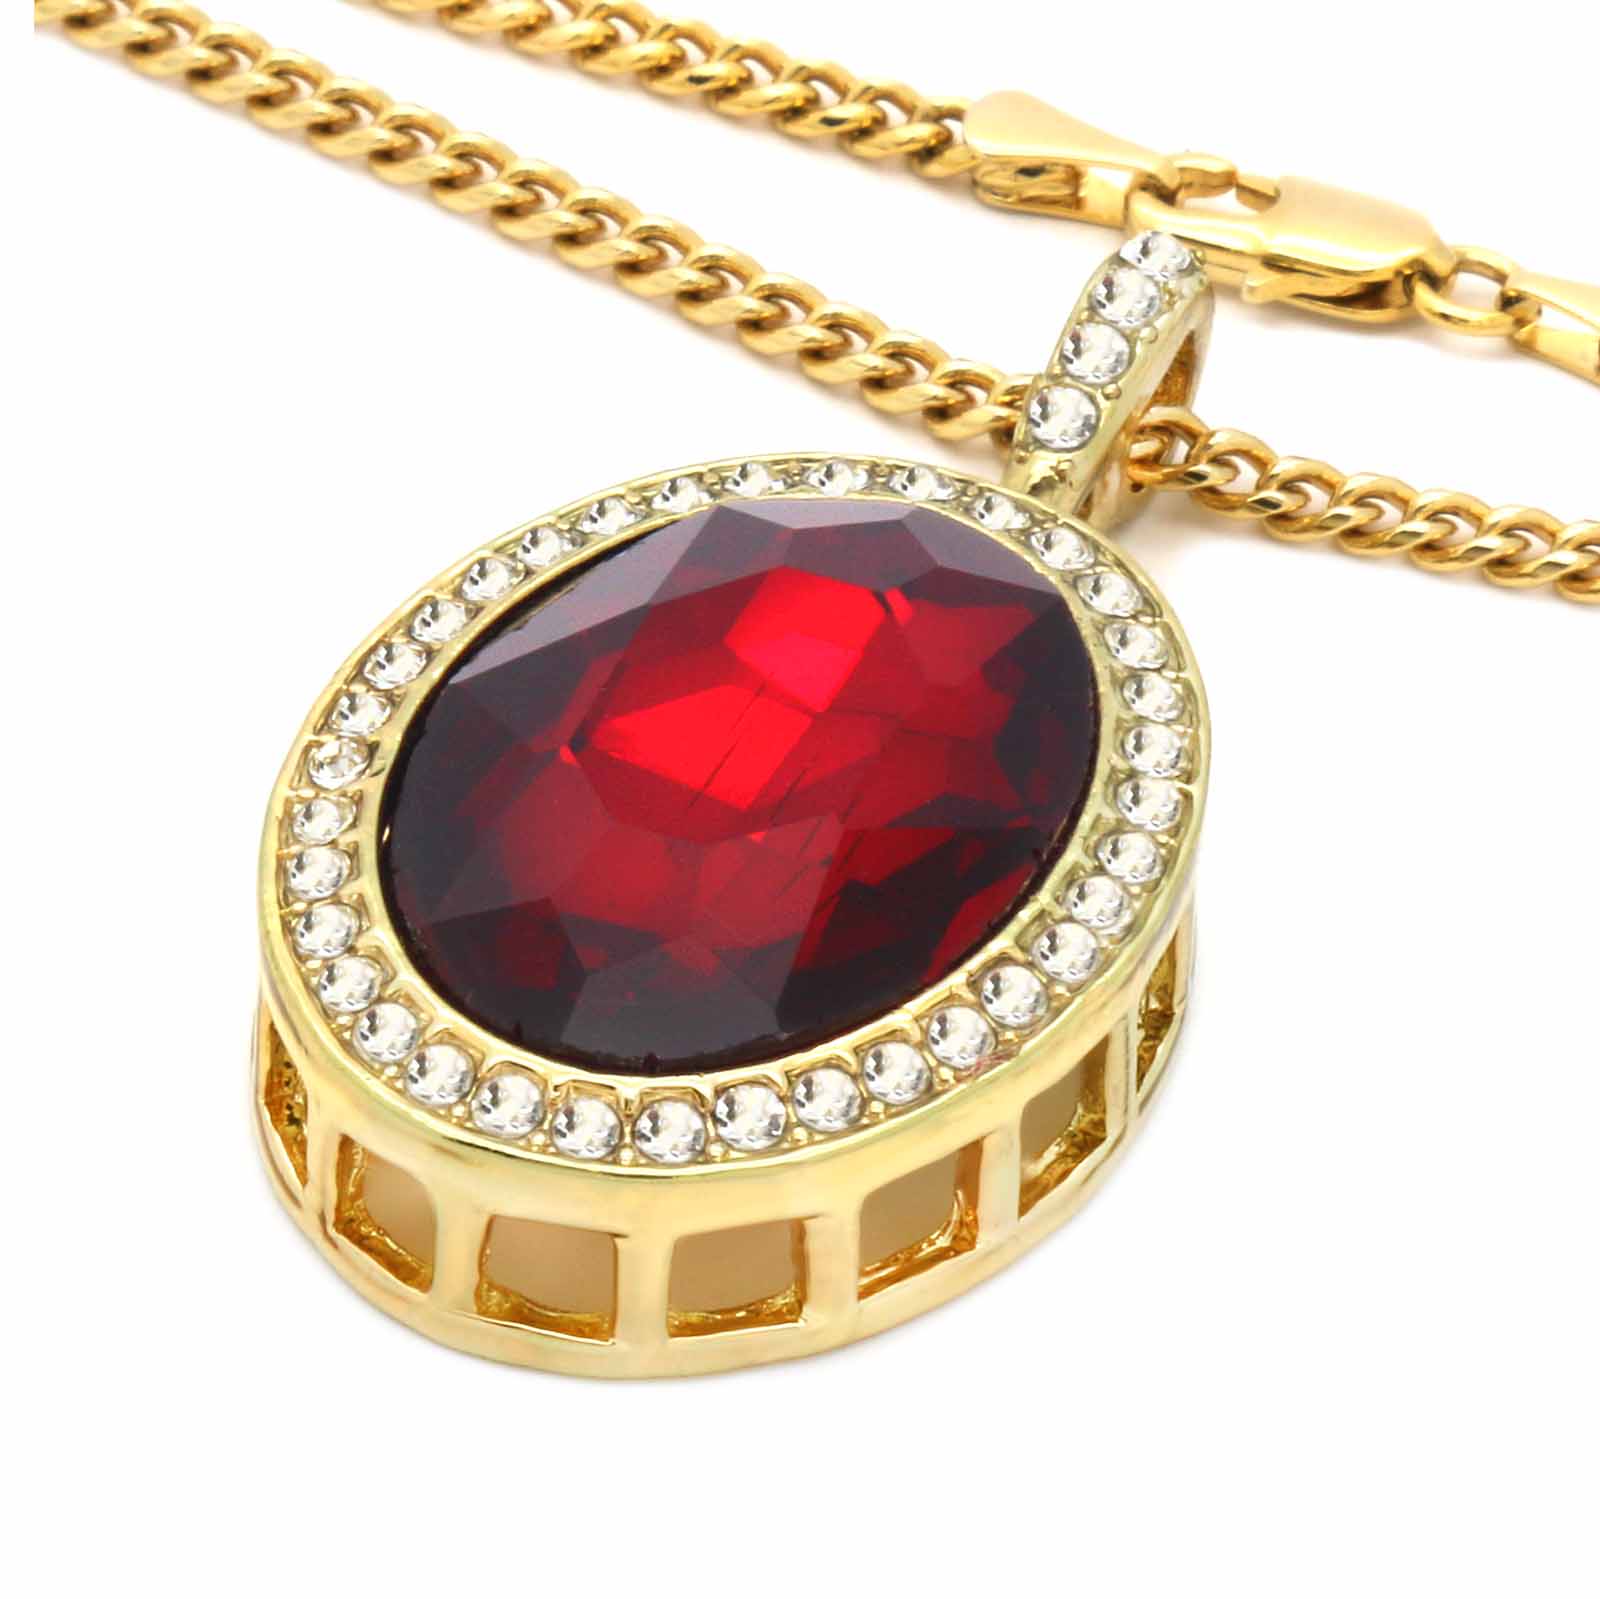 OVAL RUBY RED NECKLACE PENDANT